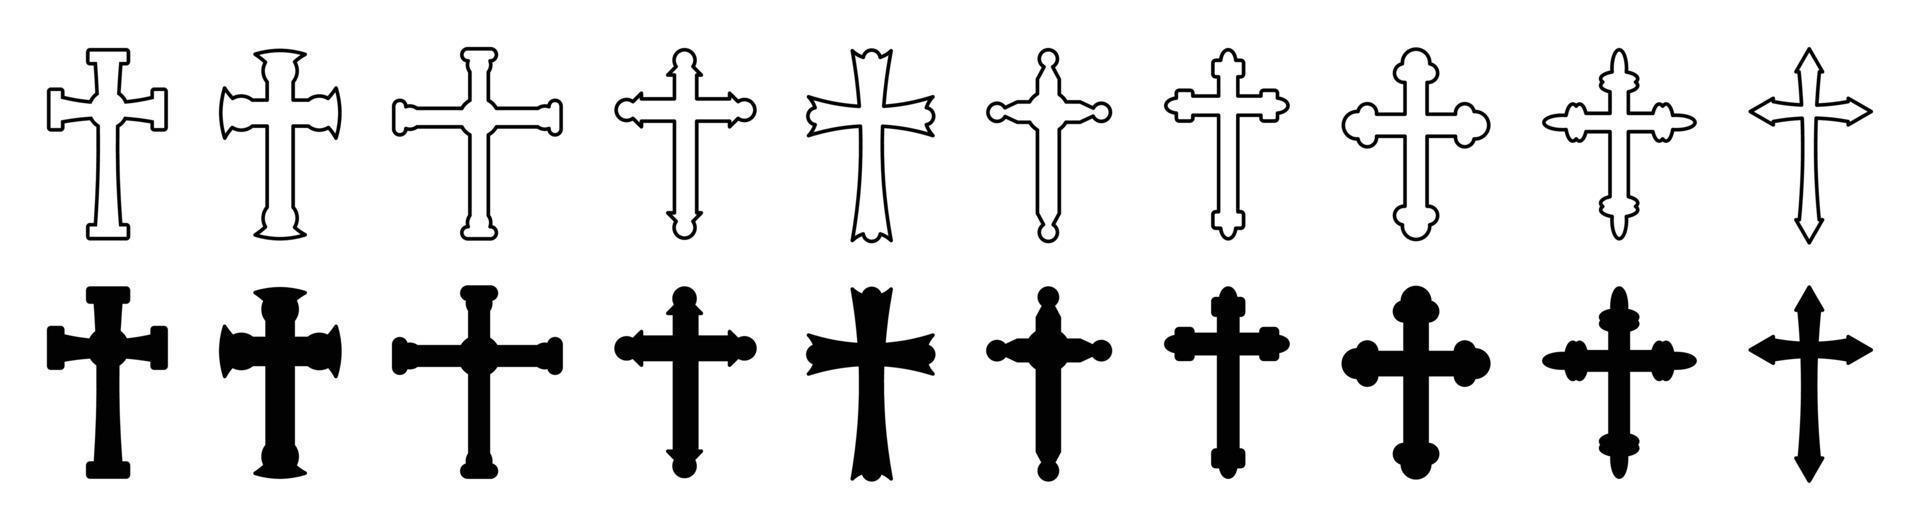 icon set christian cross vector symbol flat and outline style. Cross as symbol of easter, faith, death and resurrection